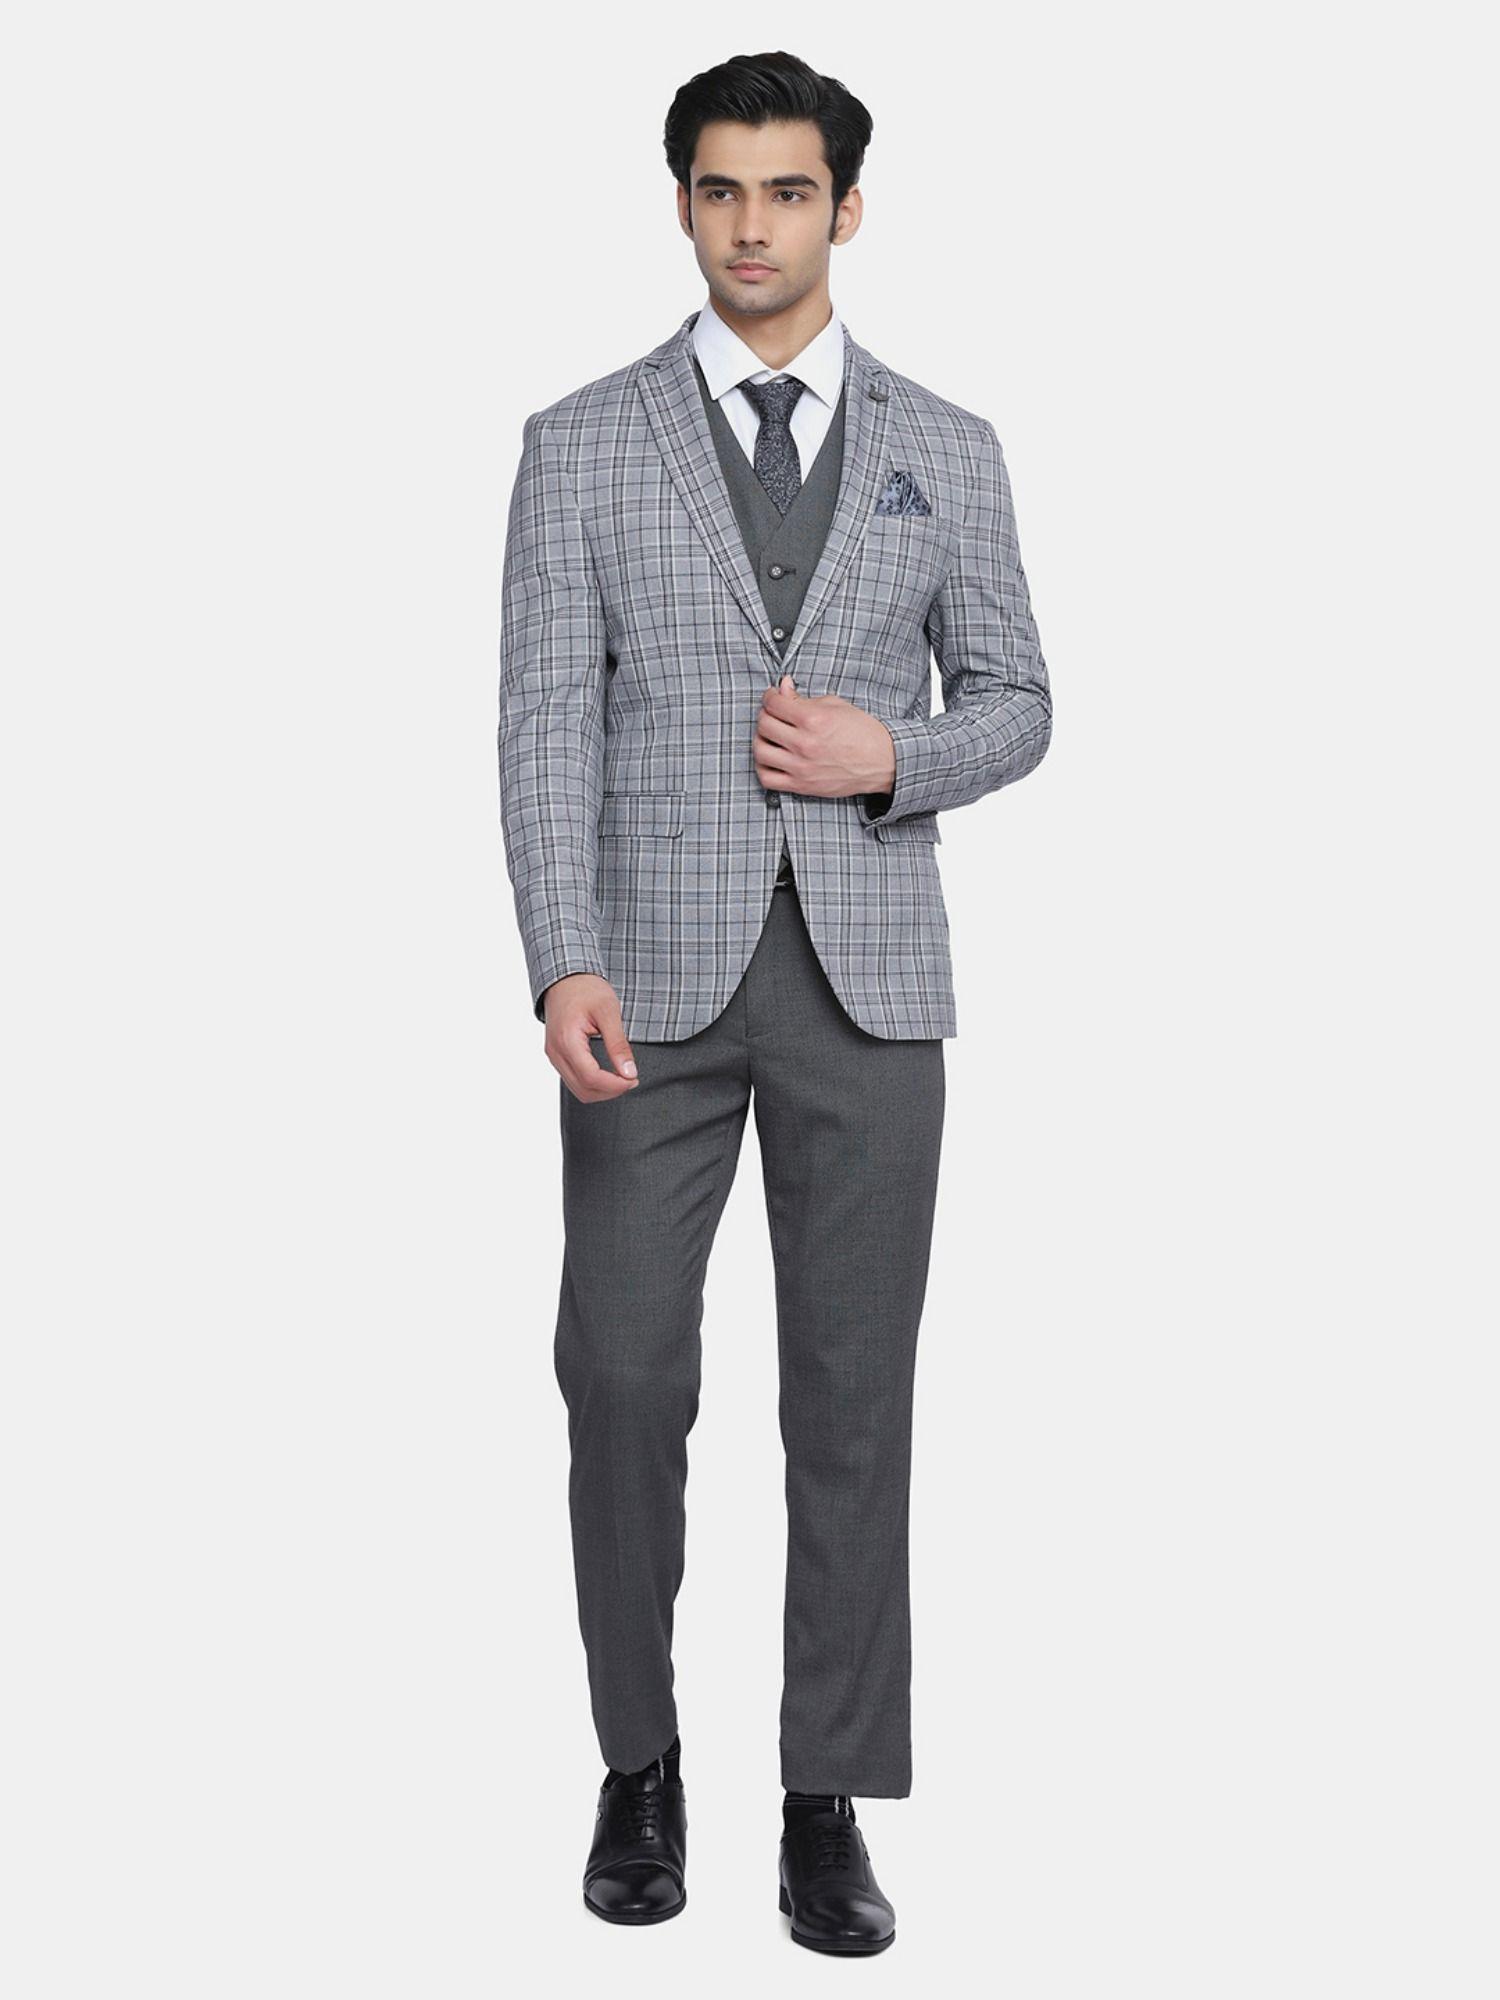 grace 6x check suits in grey